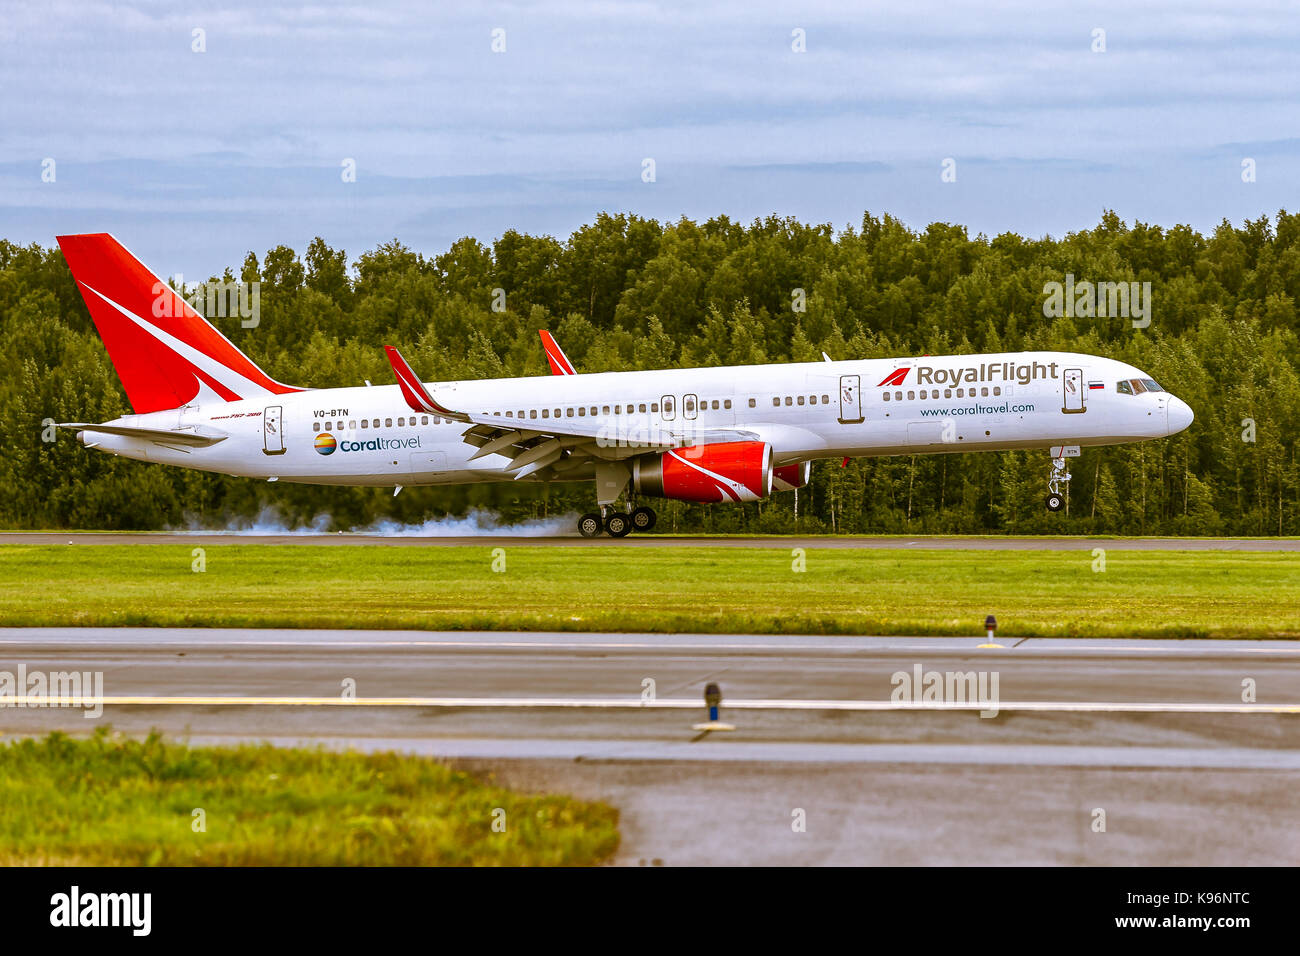 Pulkovo, Saint-Petersburg, Russia - August 10, 2017:   The airplane  Boeing B757 of RoyalFlight airlines is landing on the runway against the backgrou Stock Photo